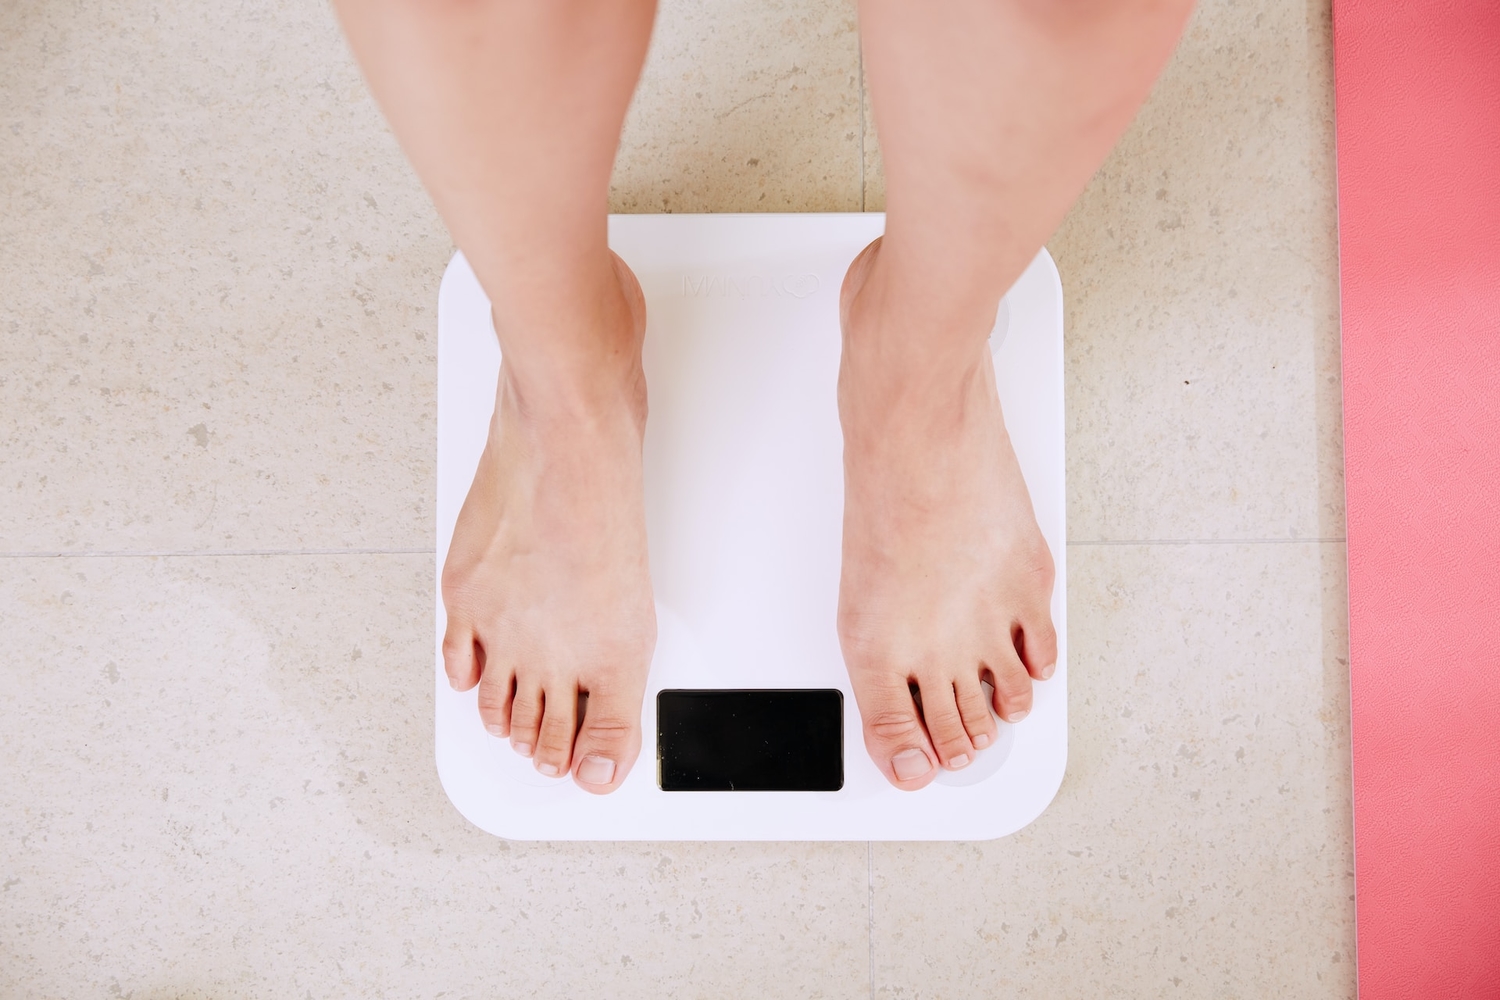 How to Lose Weight Safely and Effectively